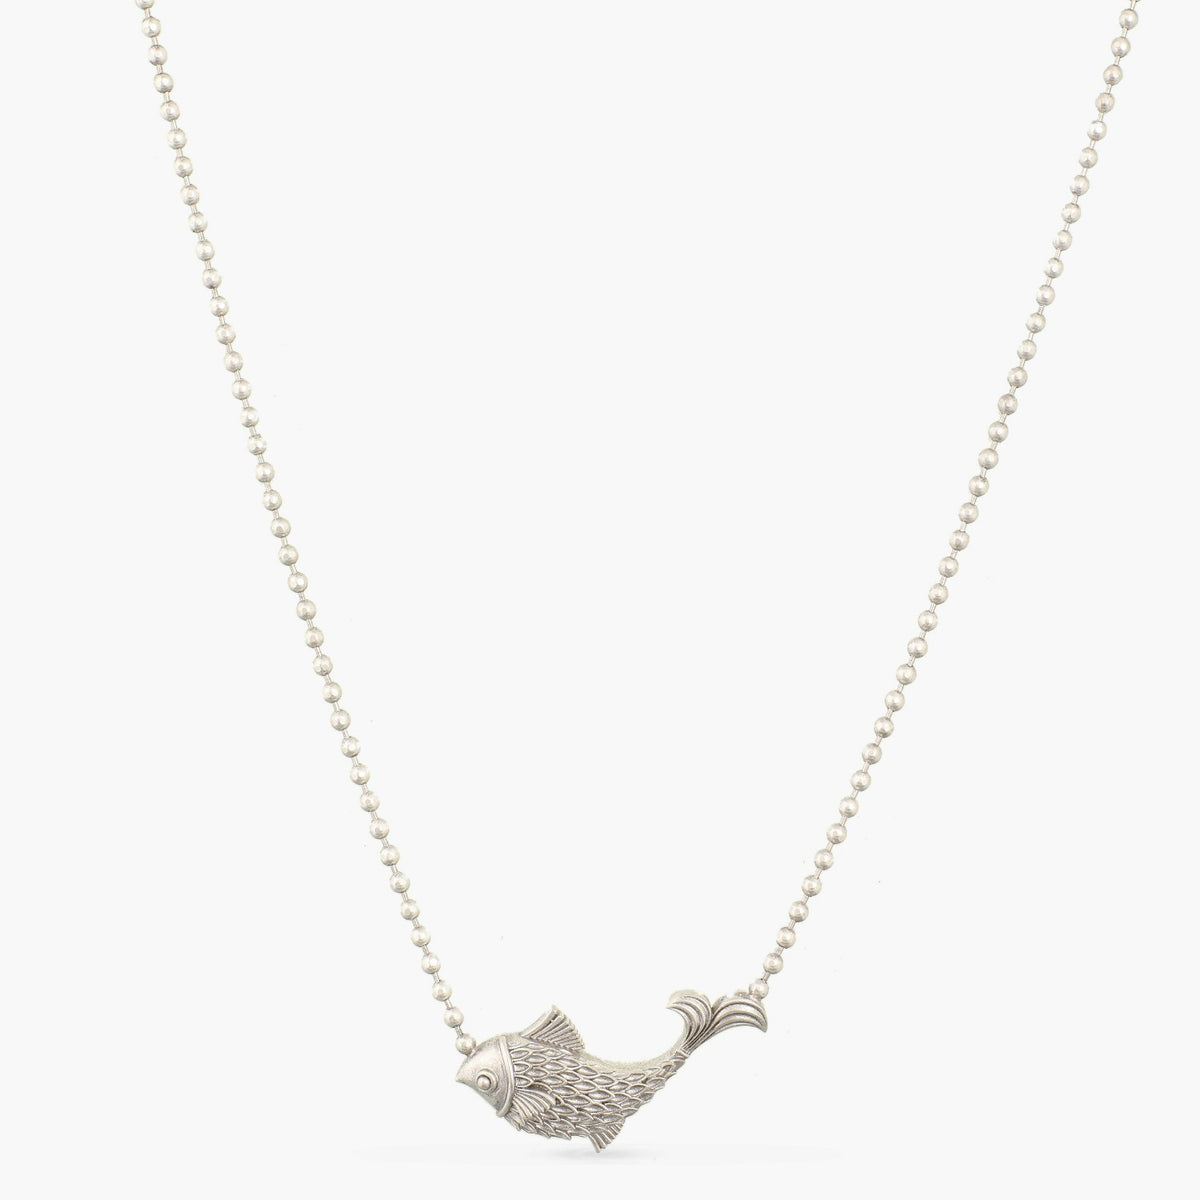 Fish Oxidized Beads Chain Necklace